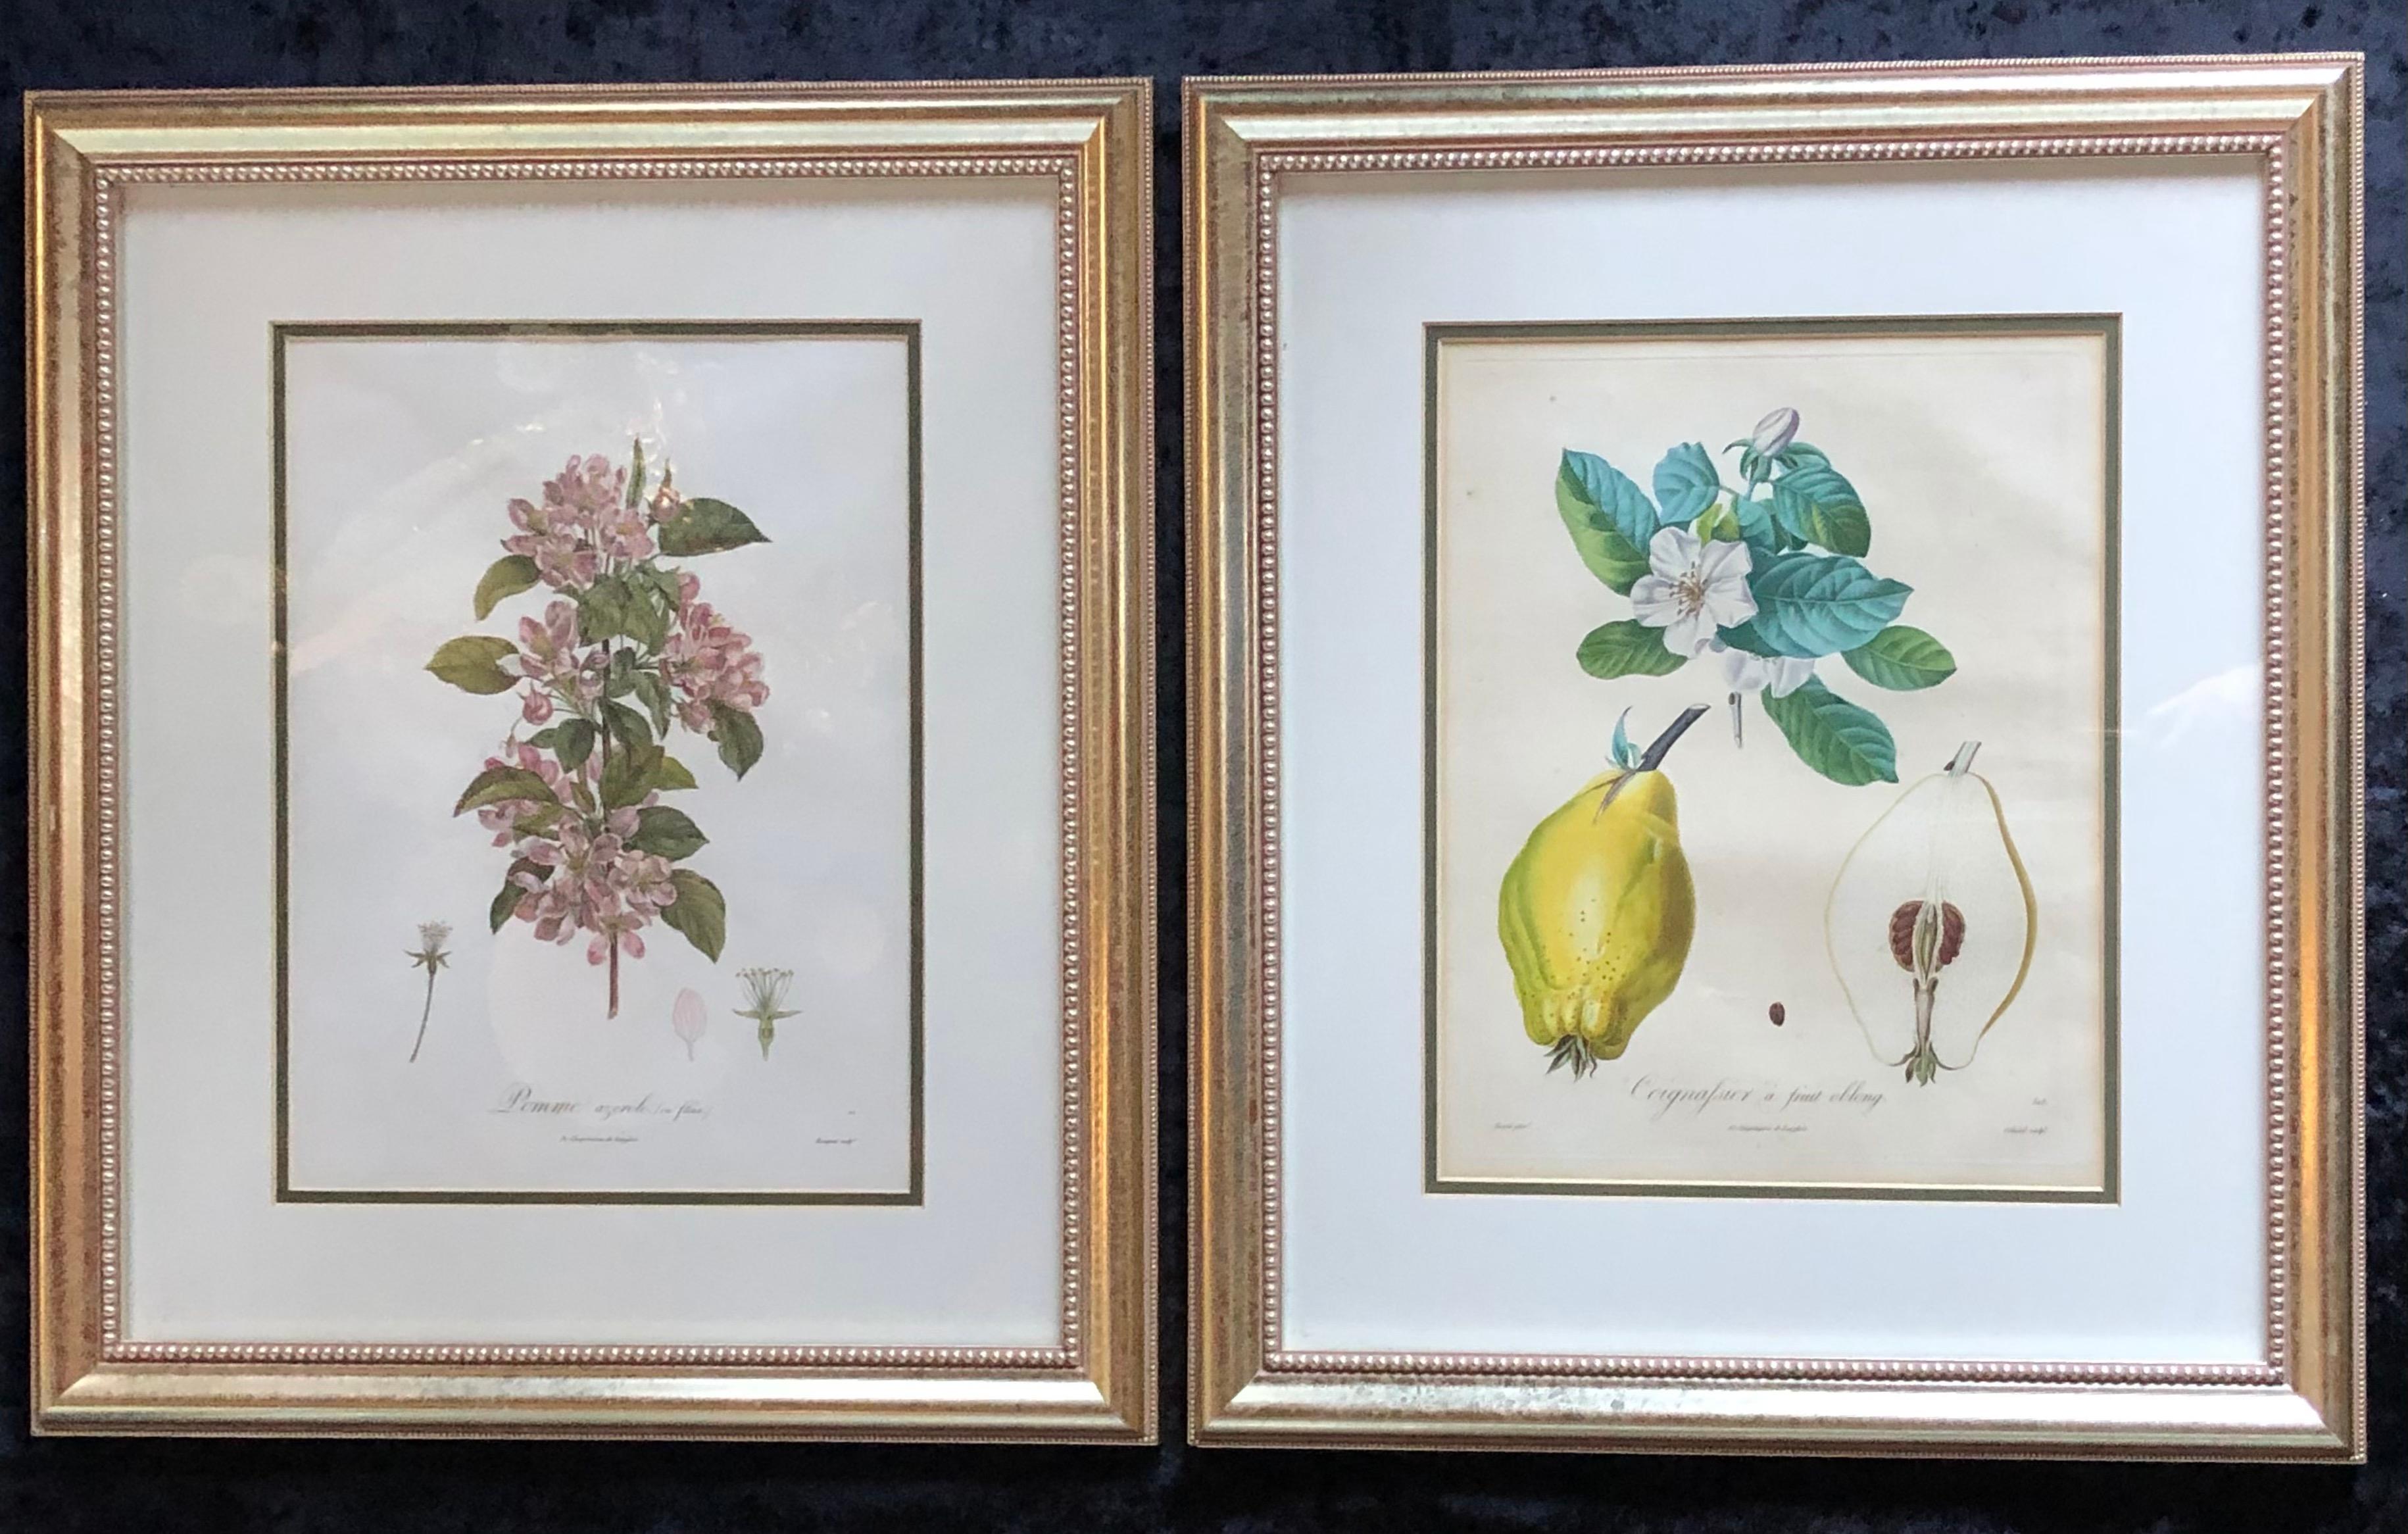 Ten Hand-Colored Color Stipple Engravings from Traite Des Arbres Fruitiers In Good Condition For Sale In Stamford, CT